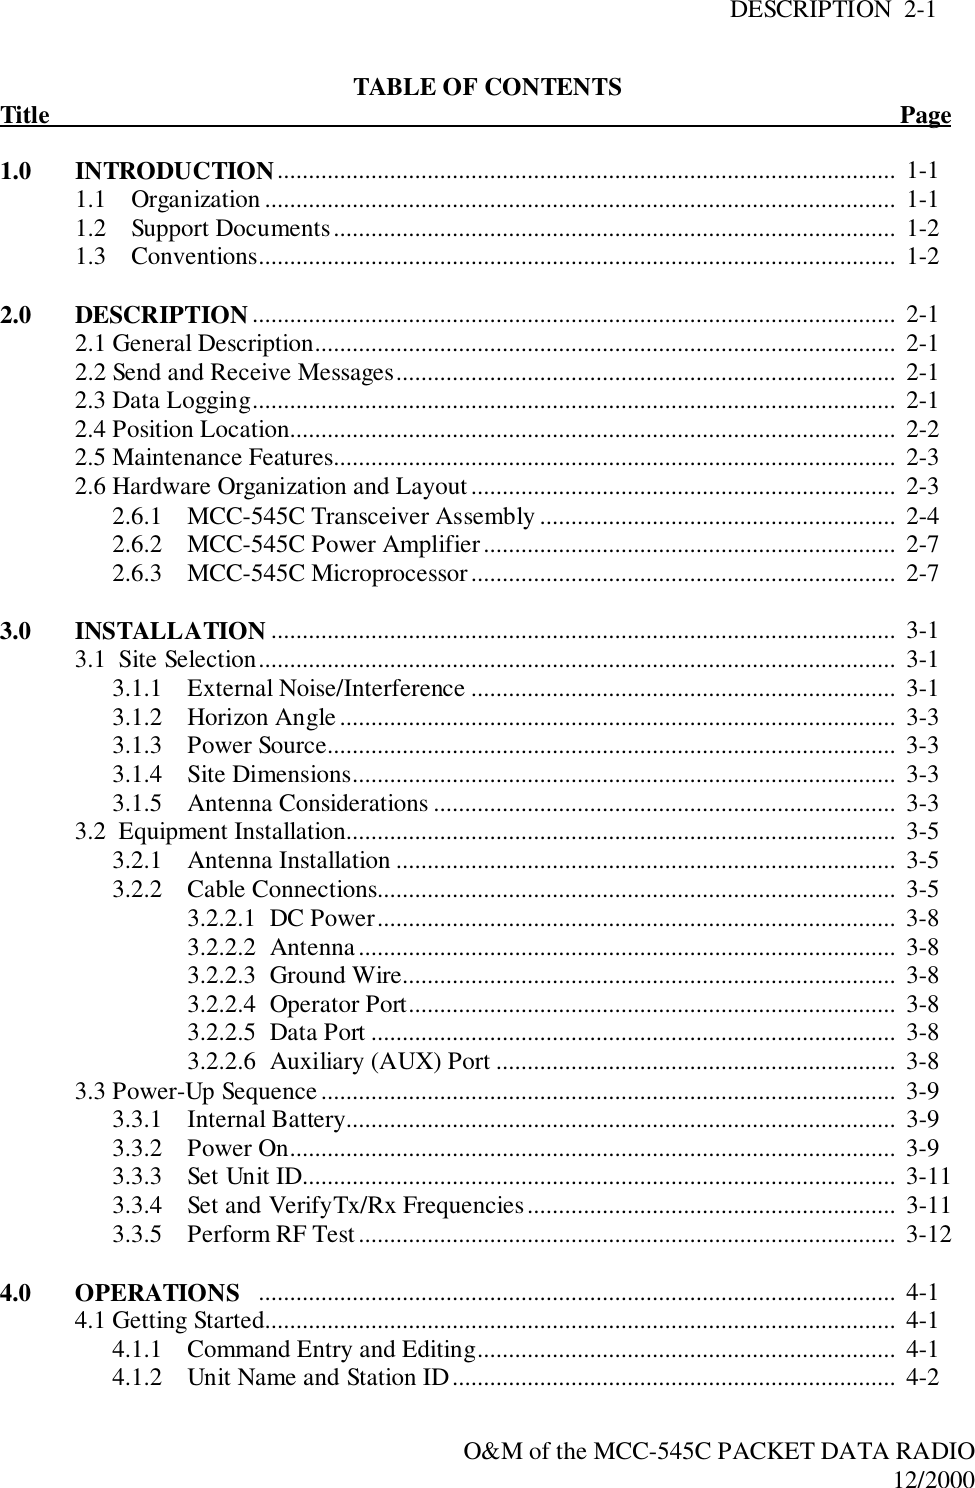 DESCRIPTION  2-1O&amp;M of the MCC-545C PACKET DATA RADIO12/2000TABLE OF CONTENTSTitle                                                                                                                                        Page1.0 INTRODUCTION...................................................................................................  1-11.1    Organization .....................................................................................................  1-11.2    Support Documents..........................................................................................  1-21.3    Conventions......................................................................................................  1-22.0 DESCRIPTION .......................................................................................................  2-12.1 General Description.............................................................................................  2-12.2 Send and Receive Messages................................................................................  2-12.3 Data Logging.......................................................................................................  2-12.4 Position Location.................................................................................................  2-22.5 Maintenance Features..........................................................................................  2-32.6 Hardware Organization and Layout ....................................................................  2-32.6.1 MCC-545C Transceiver Assembly .........................................................  2-42.6.2 MCC-545C Power Amplifier..................................................................  2-72.6.3 MCC-545C Microprocessor....................................................................  2-73.0 INSTALLATION ....................................................................................................  3-13.1  Site Selection......................................................................................................  3-13.1.1 External Noise/Interference ....................................................................  3-13.1.2 Horizon Angle.........................................................................................  3-33.1.3 Power Source...........................................................................................  3-33.1.4 Site Dimensions.......................................................................................  3-33.1.5 Antenna Considerations ..........................................................................  3-33.2  Equipment Installation........................................................................................  3-53.2.1 Antenna Installation ................................................................................  3-53.2.2 Cable Connections...................................................................................  3-53.2.2.1 DC Power...................................................................................  3-83.2.2.2 Antenna ......................................................................................  3-83.2.2.3 Ground Wire...............................................................................  3-83.2.2.4  Operator Port..............................................................................  3-83.2.2.5 Data Port ....................................................................................  3-83.2.2.6 Auxiliary (AUX) Port ................................................................  3-83.3 Power-Up Sequence............................................................................................  3-93.3.1 Internal Battery........................................................................................  3-93.3.2 Power On.................................................................................................  3-93.3.3 Set Unit ID...............................................................................................  3-113.3.4 Set and VerifyTx/Rx Frequencies...........................................................  3-113.3.5 Perform RF Test......................................................................................  3-124.0 OPERATIONS ......................................................................................................  4-14.1 Getting Started.....................................................................................................  4-14.1.1 Command Entry and Editing...................................................................  4-14.1.2 Unit Name and Station ID.......................................................................  4-2